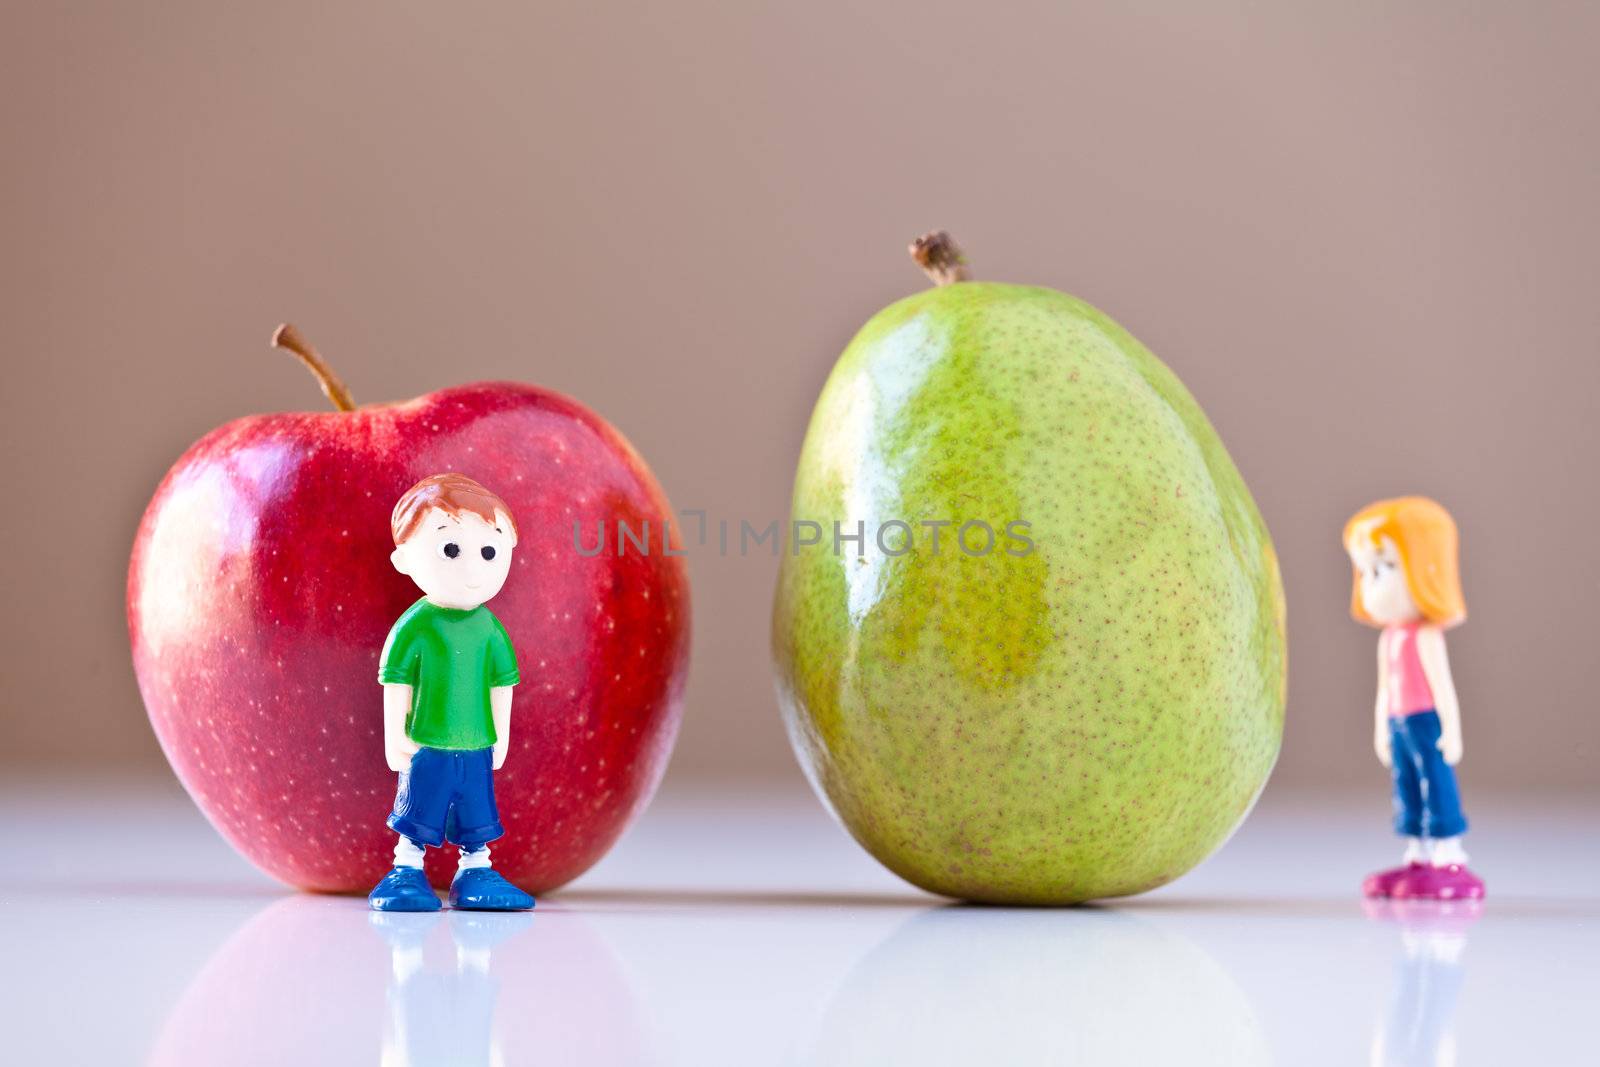 Toy girl and boy disagree over nutrition and healthy choices in front of a green pear and a  red apple. The concepts depicted in this image are nutrition, good food choices, balanced diet and good for you.